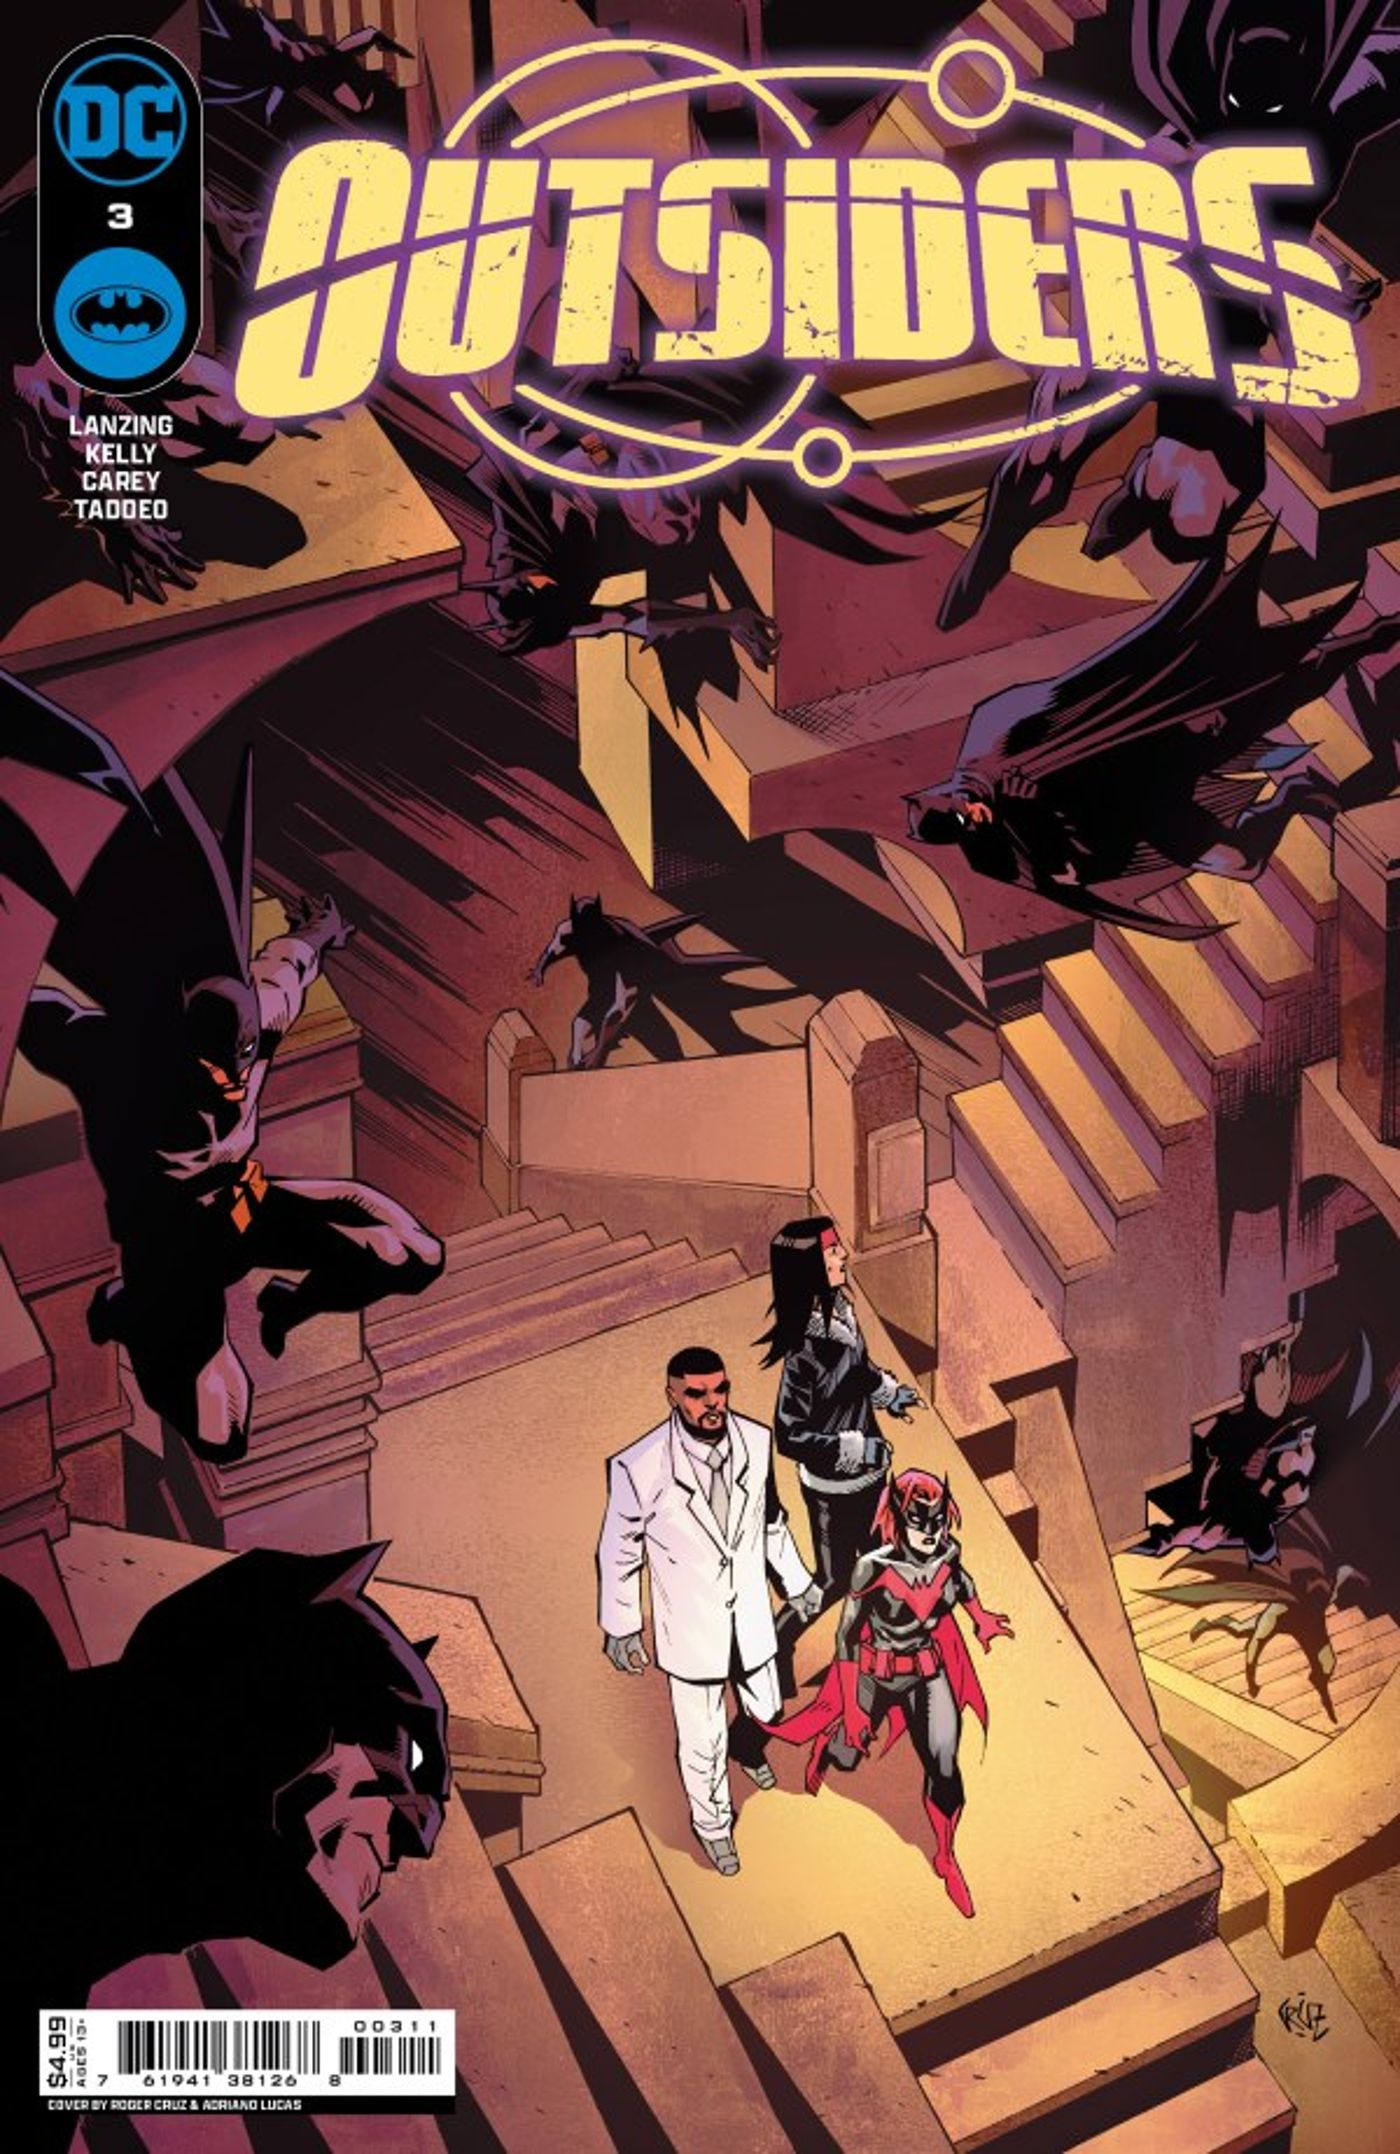 Cover for Outsiders #3, featuring a labyrinth occupied by multiple Batmen 